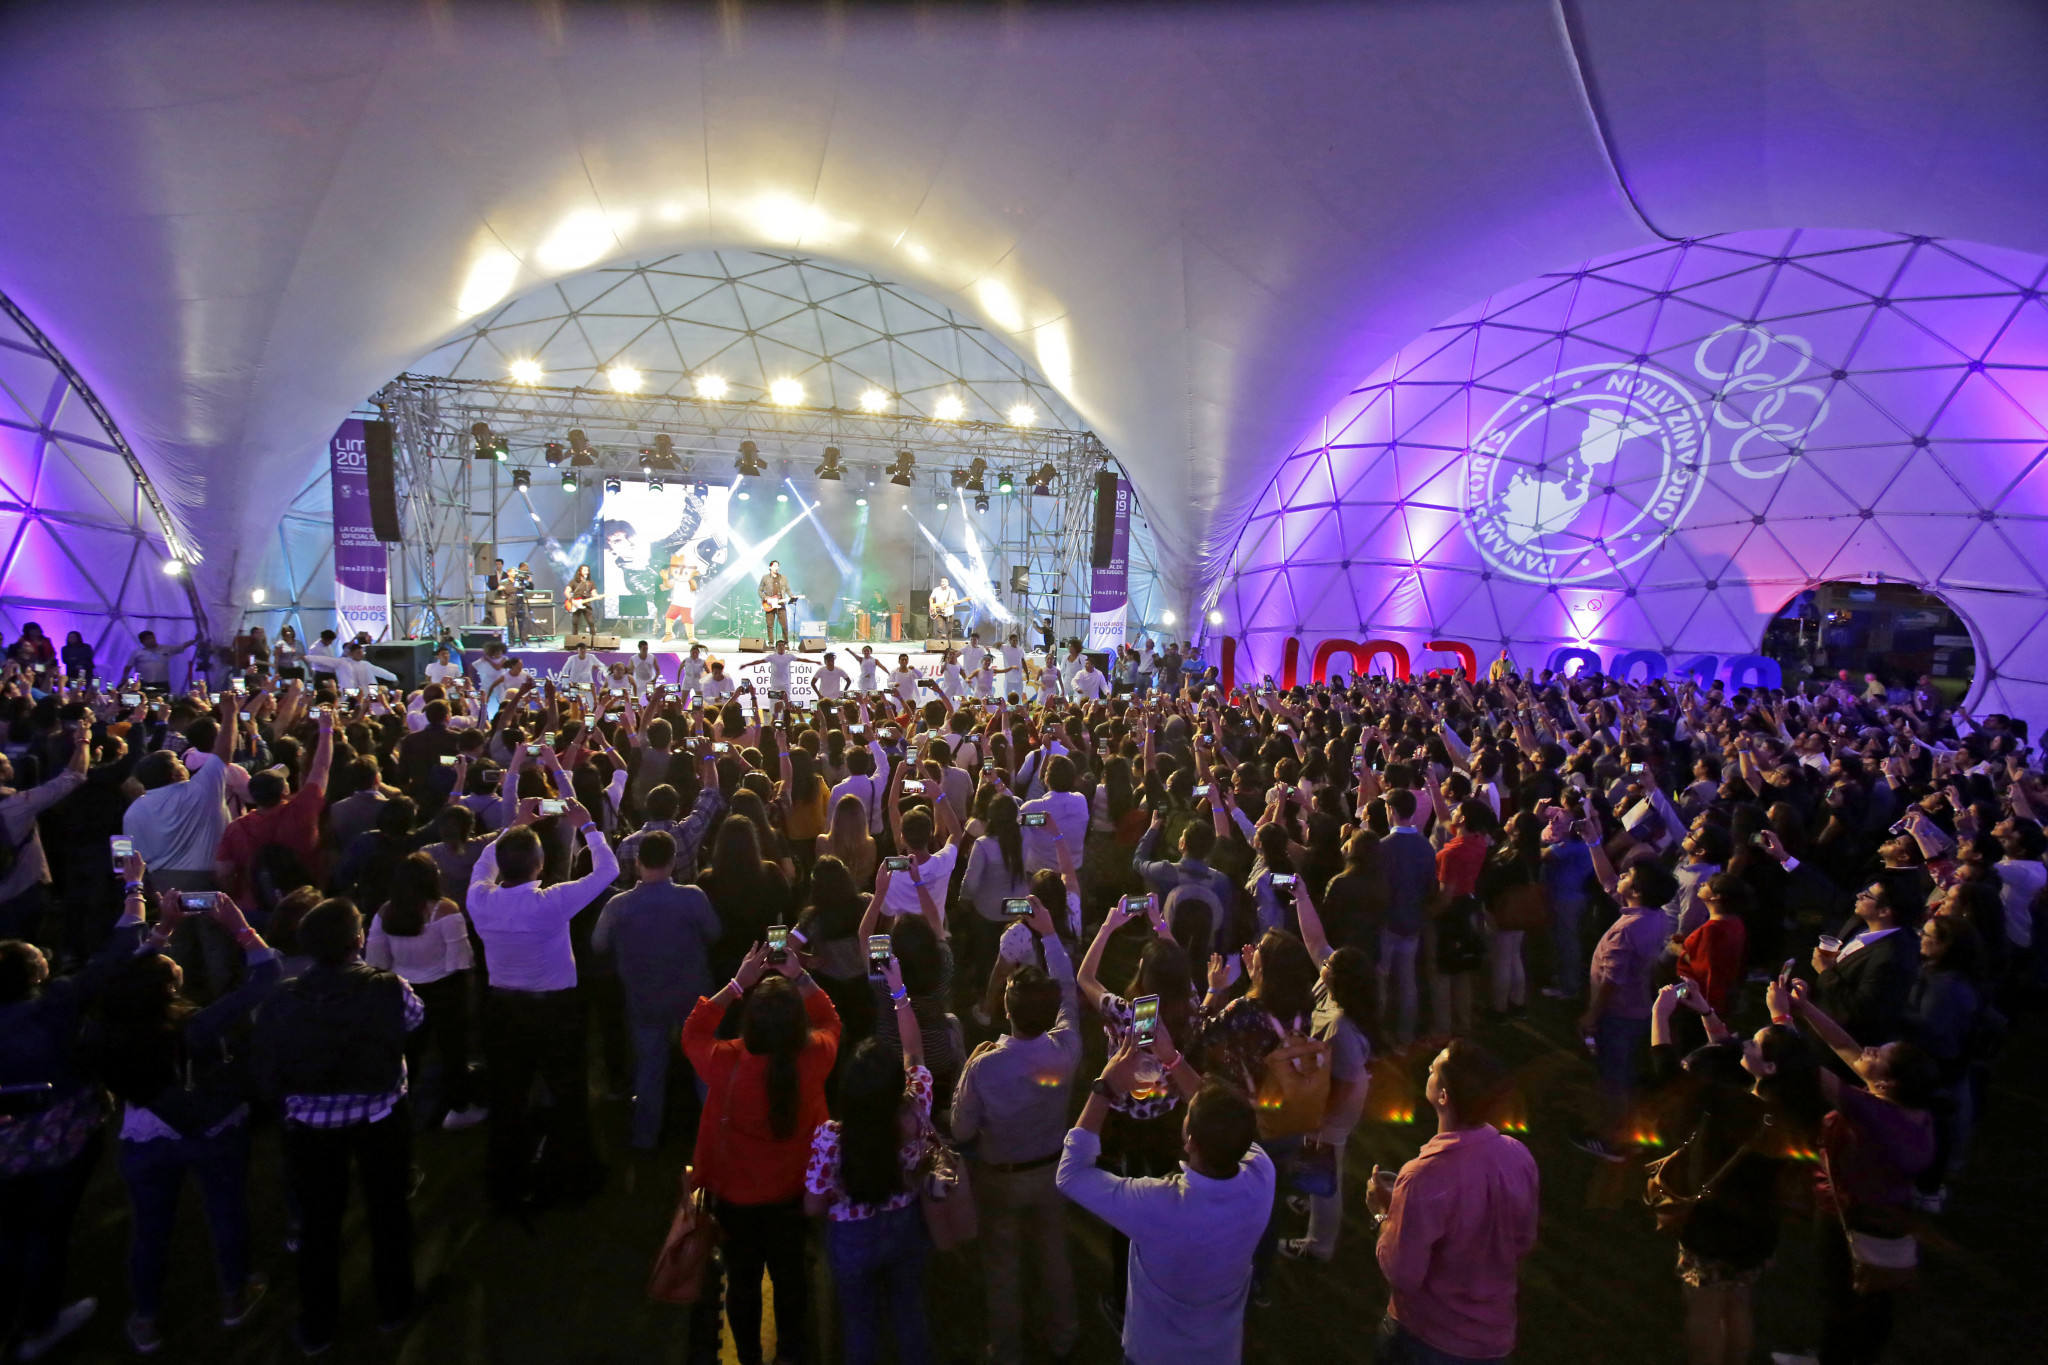 A live concert was held at the Domos Art outdoor exhibition space in San Miguel to celebrate 100 days to go until the Lima 2019 Pan American and Parapan American Games ©Lima 2019